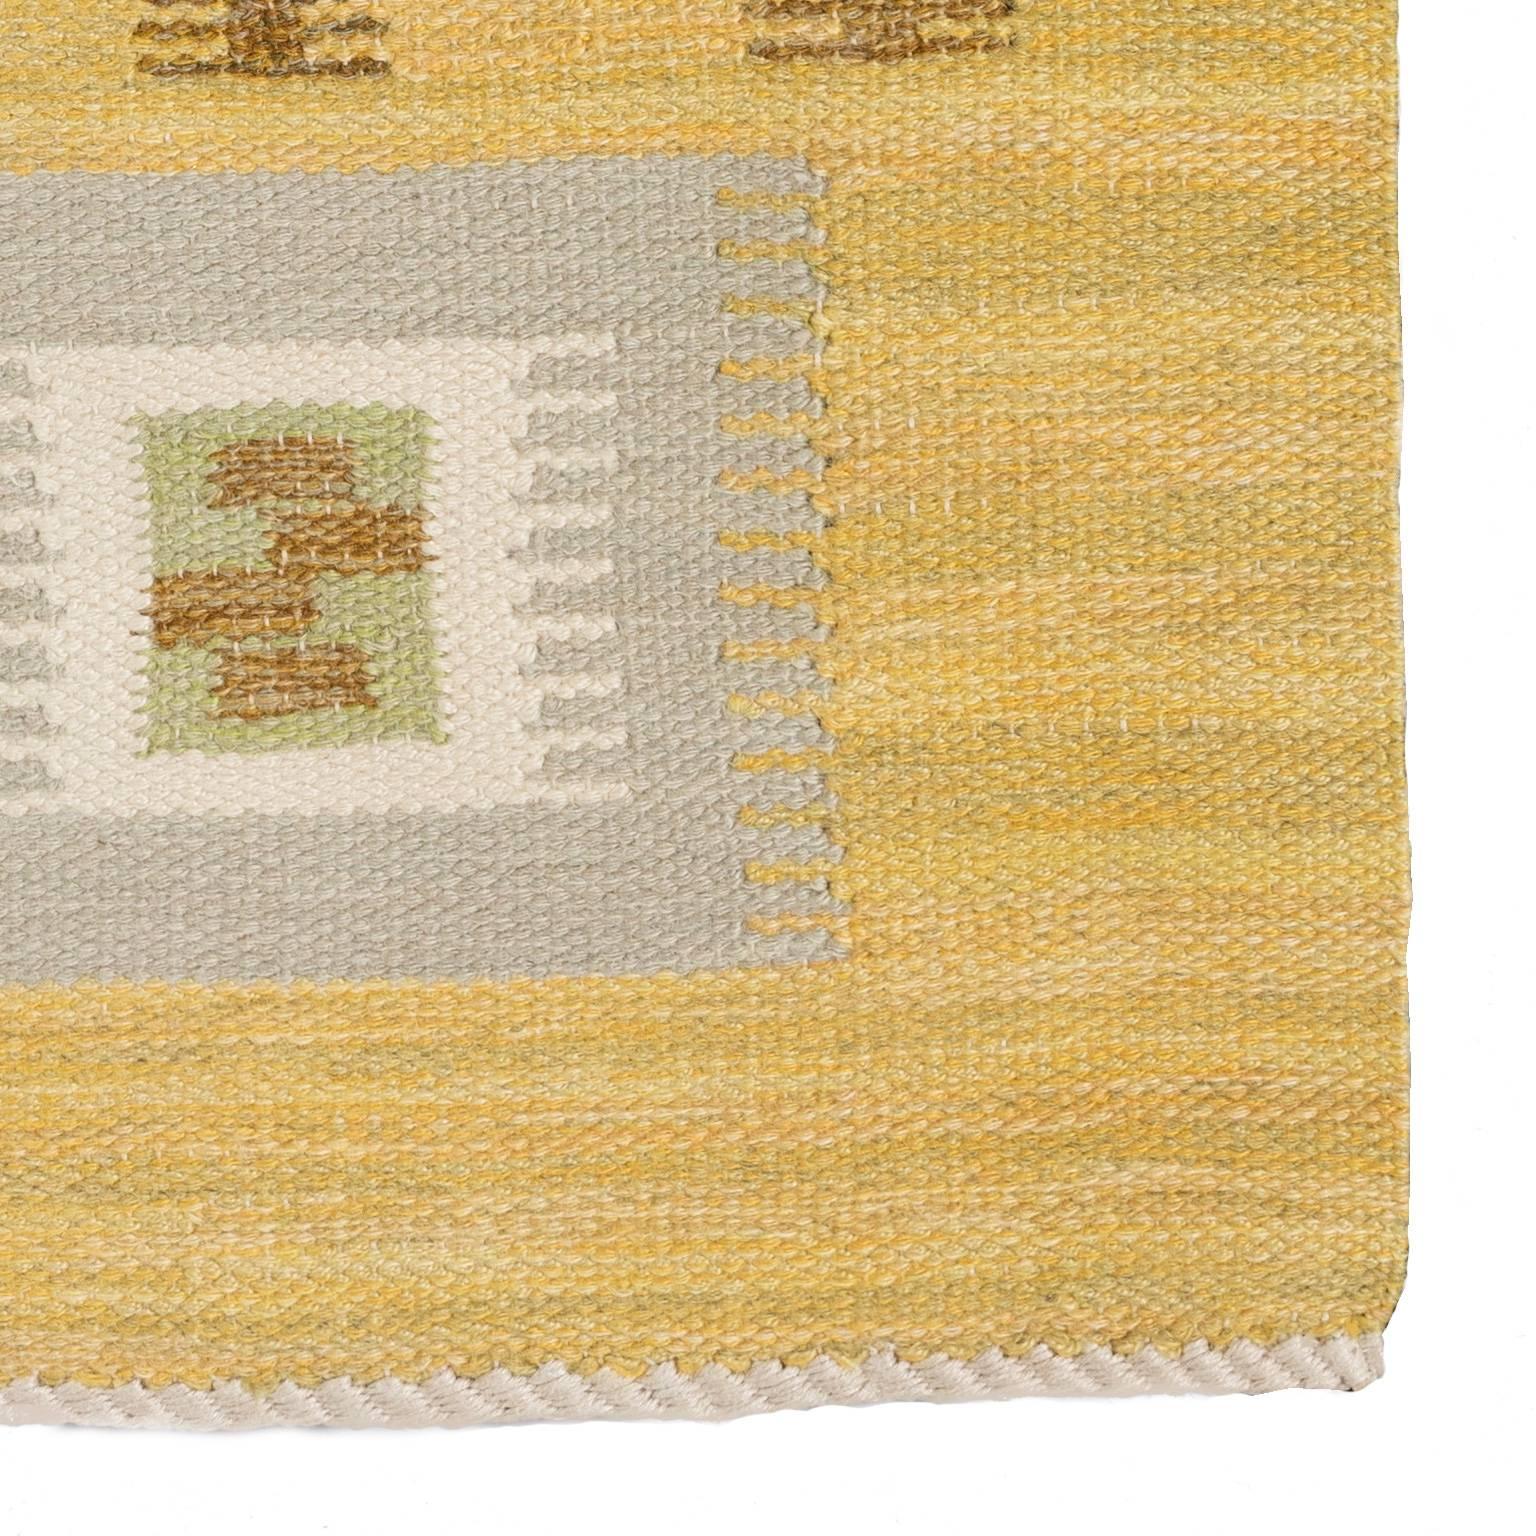 Geometric decor in Yellow, grey, green and brow tones. This rug is from Nk-textilkammare (NK-textile chamber) flat-woven Swedish rug executed in single interlocking tapestry technique. Signed NKT (Nk textile chamber) the department was lead by